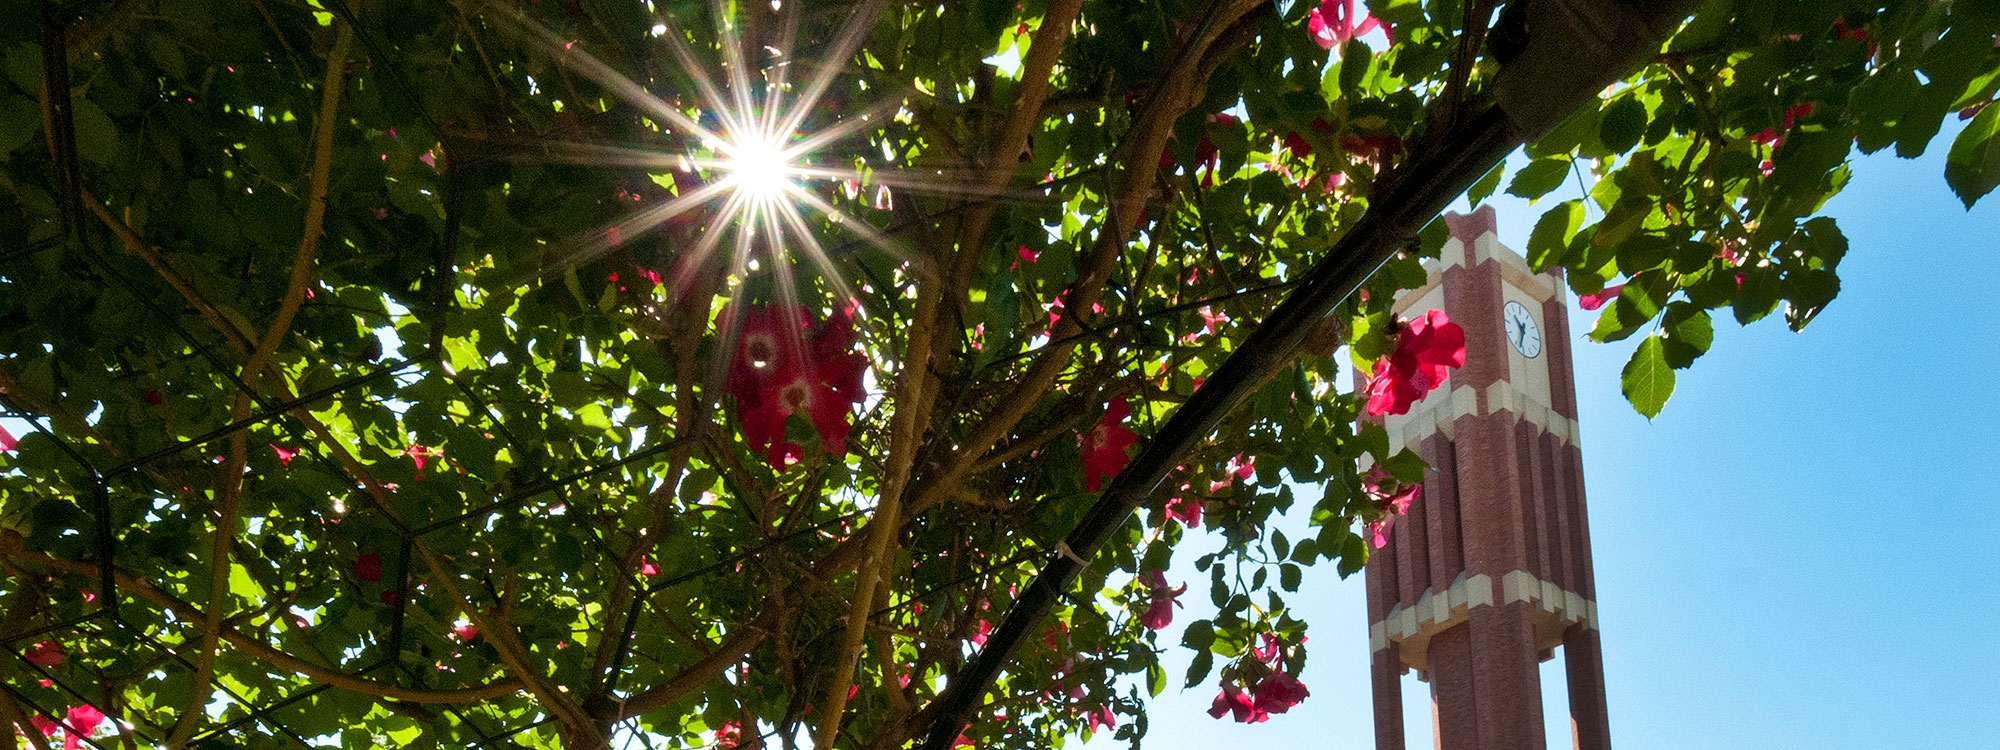 The sun shining through trees and flowers, with the Bizzell Clock Tower in the background.